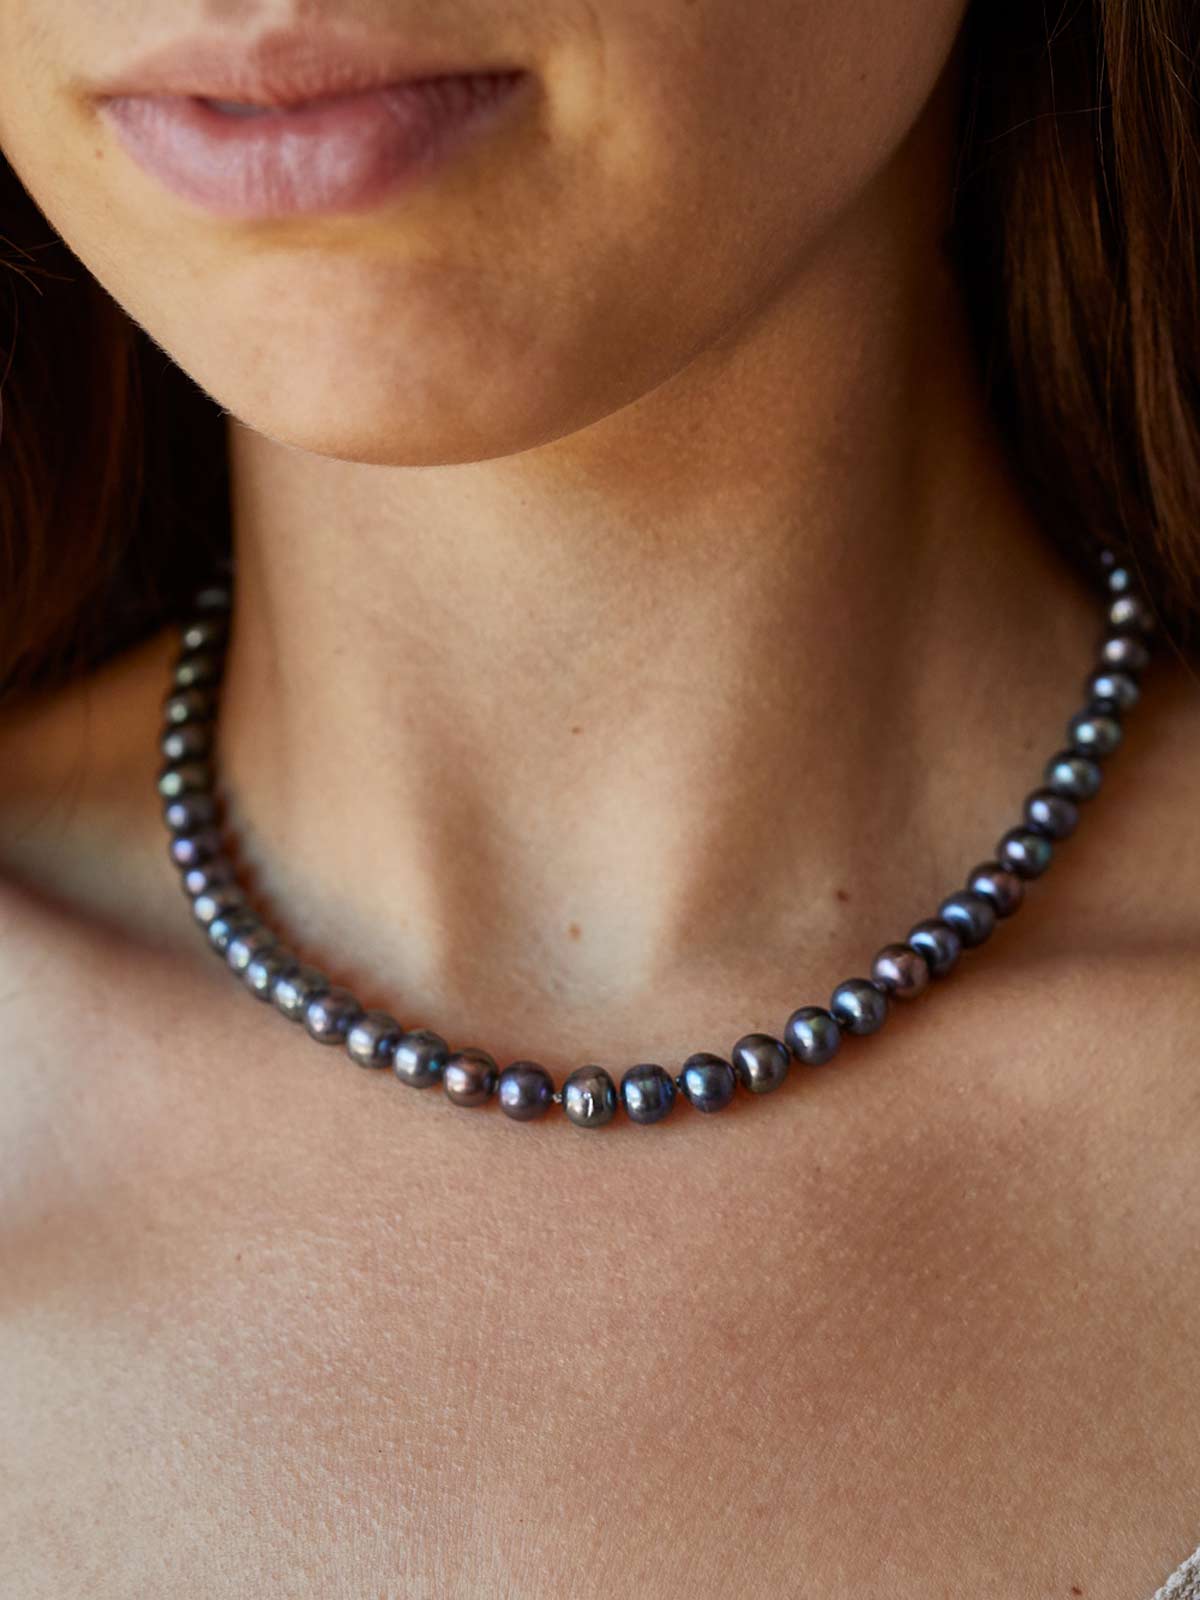 black pearl necklace on a woman's neck